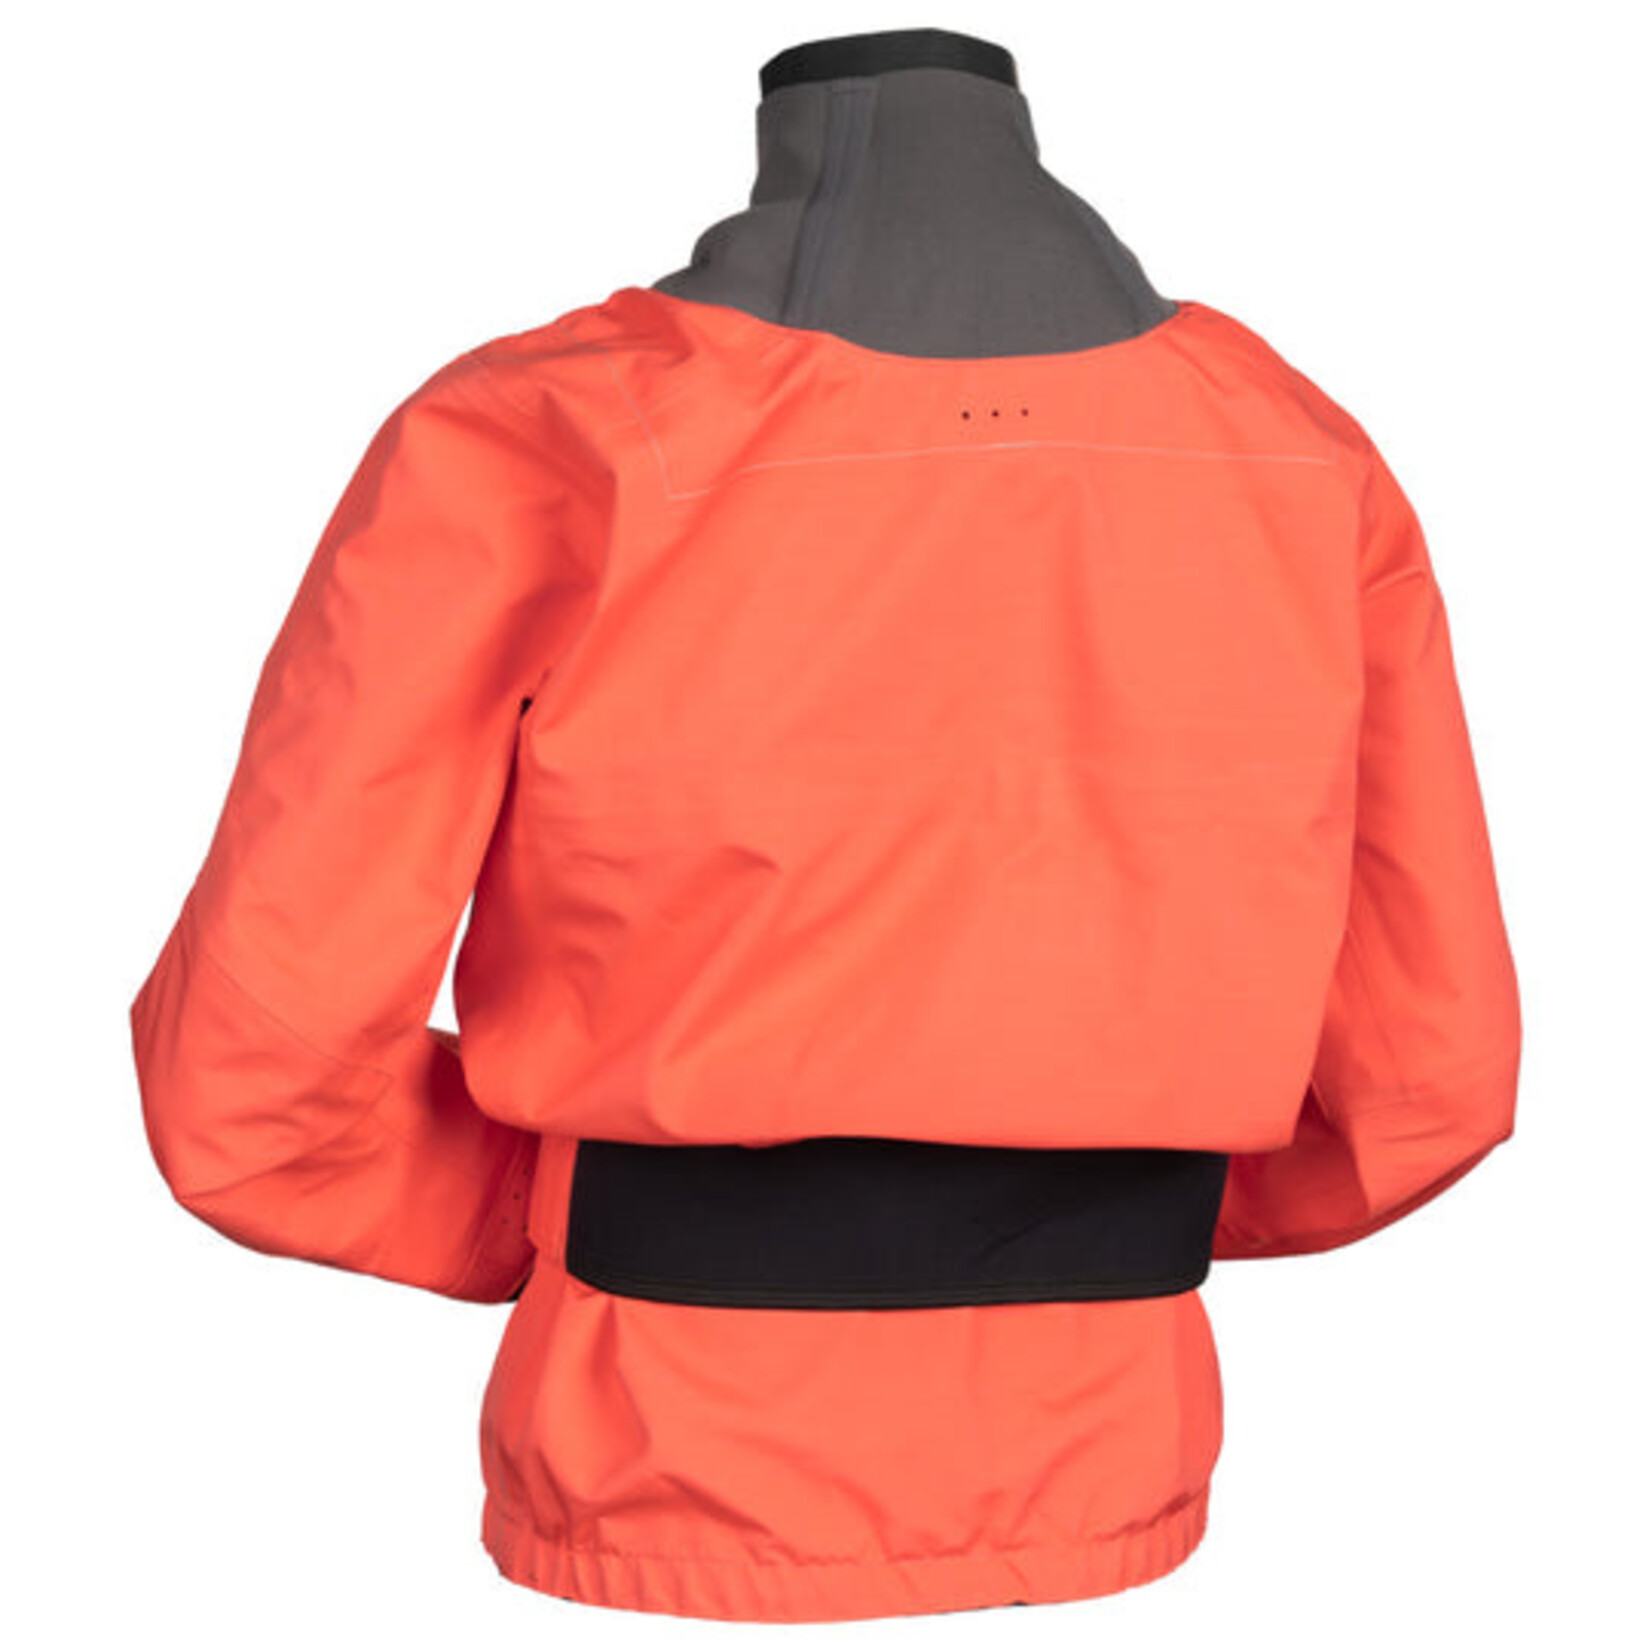 Immersion Research Immersion Research Women's Aphrodite Dry Top